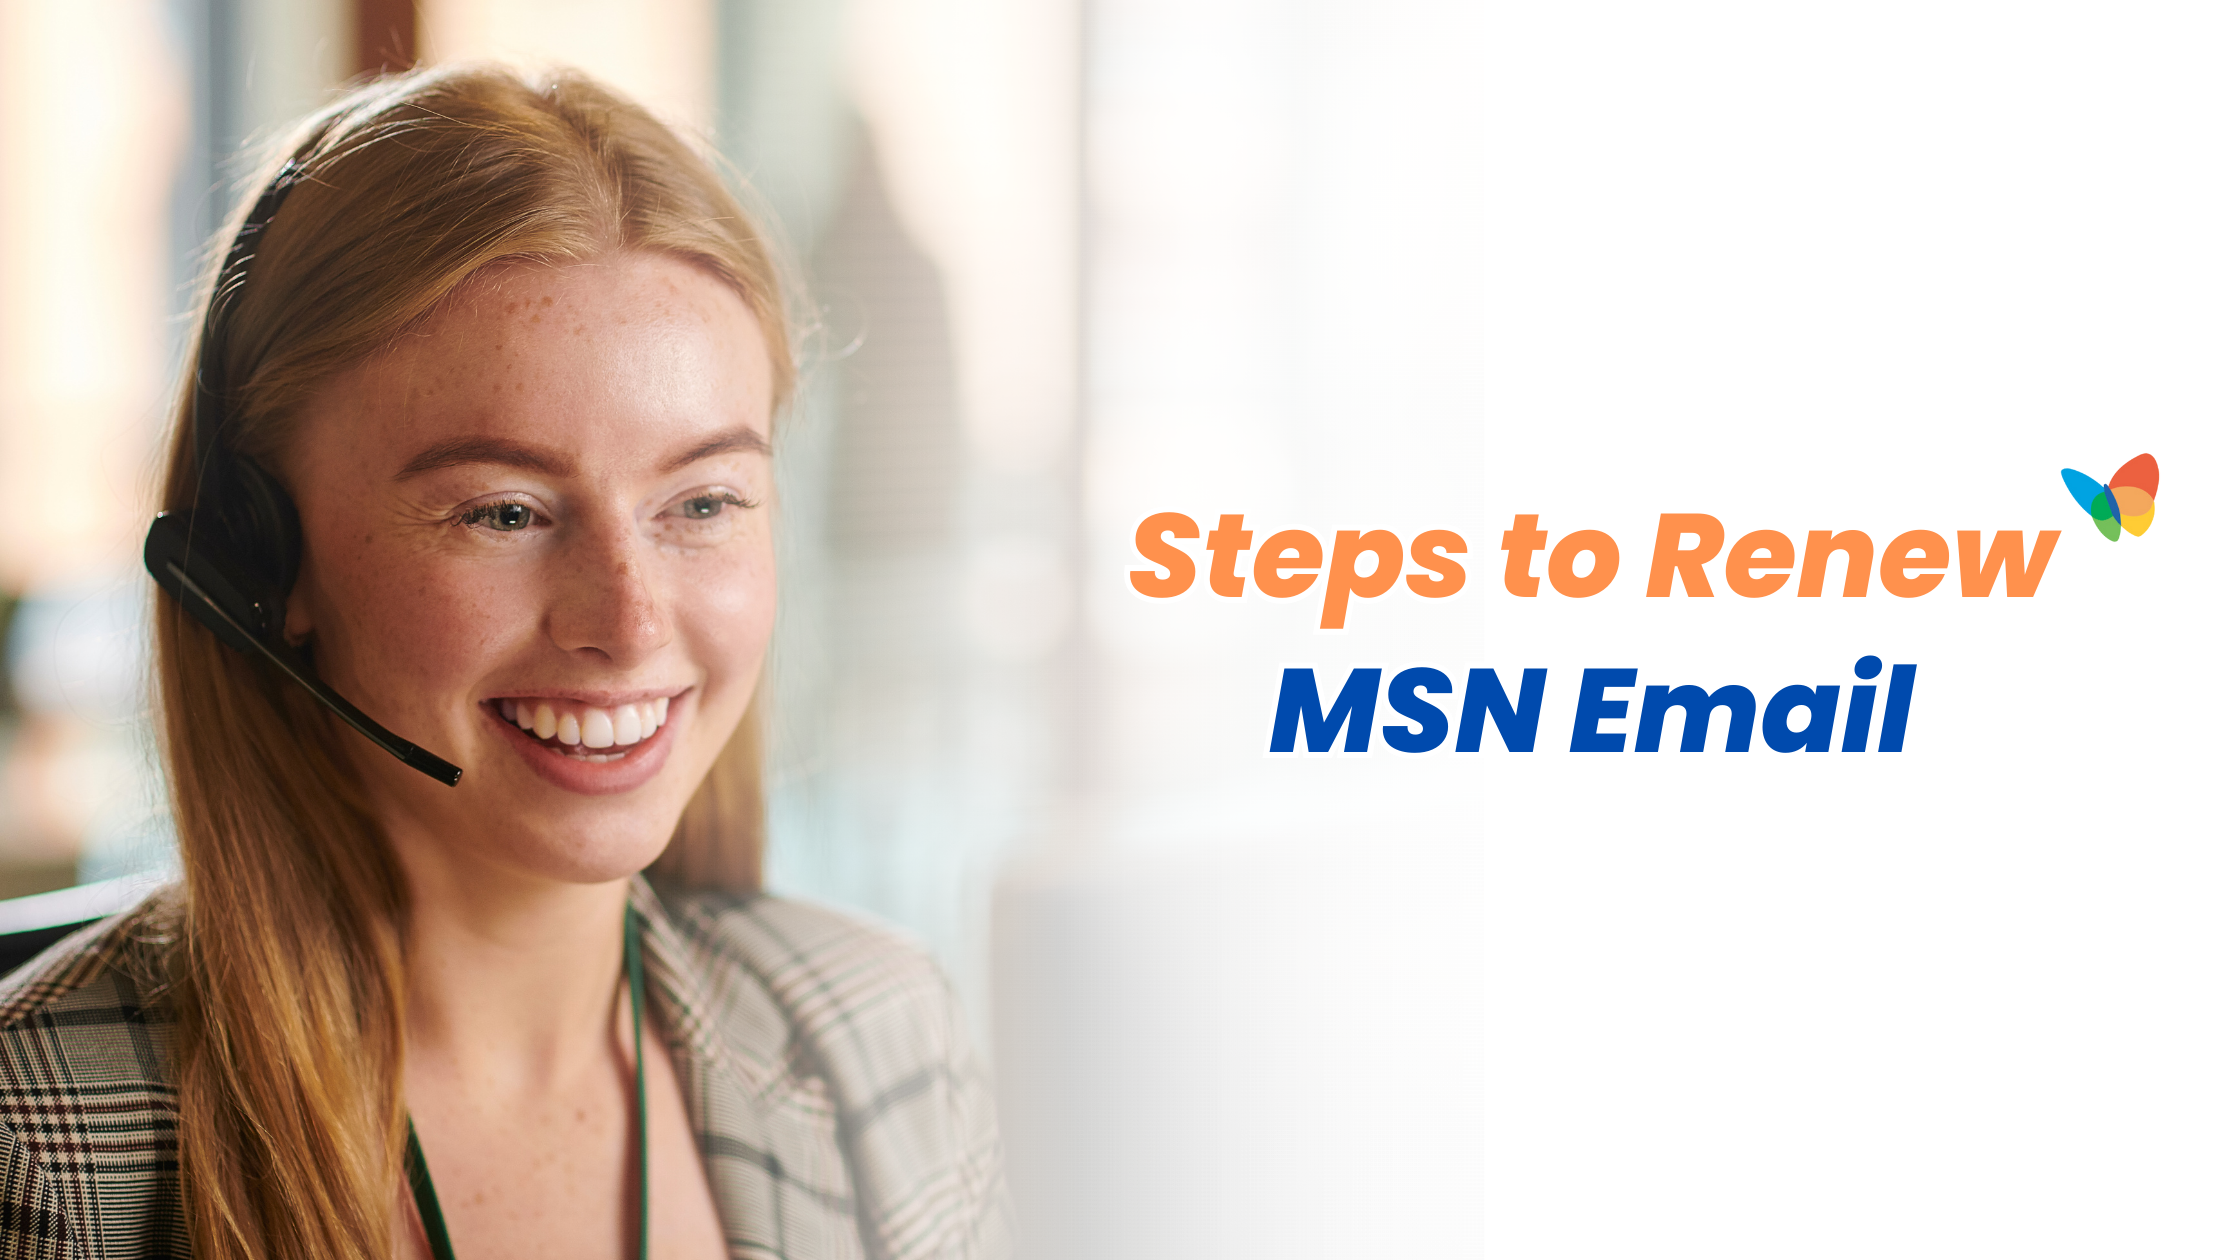 Renewing Your MSN Email Account Made Simple: Follow These 4 Steps